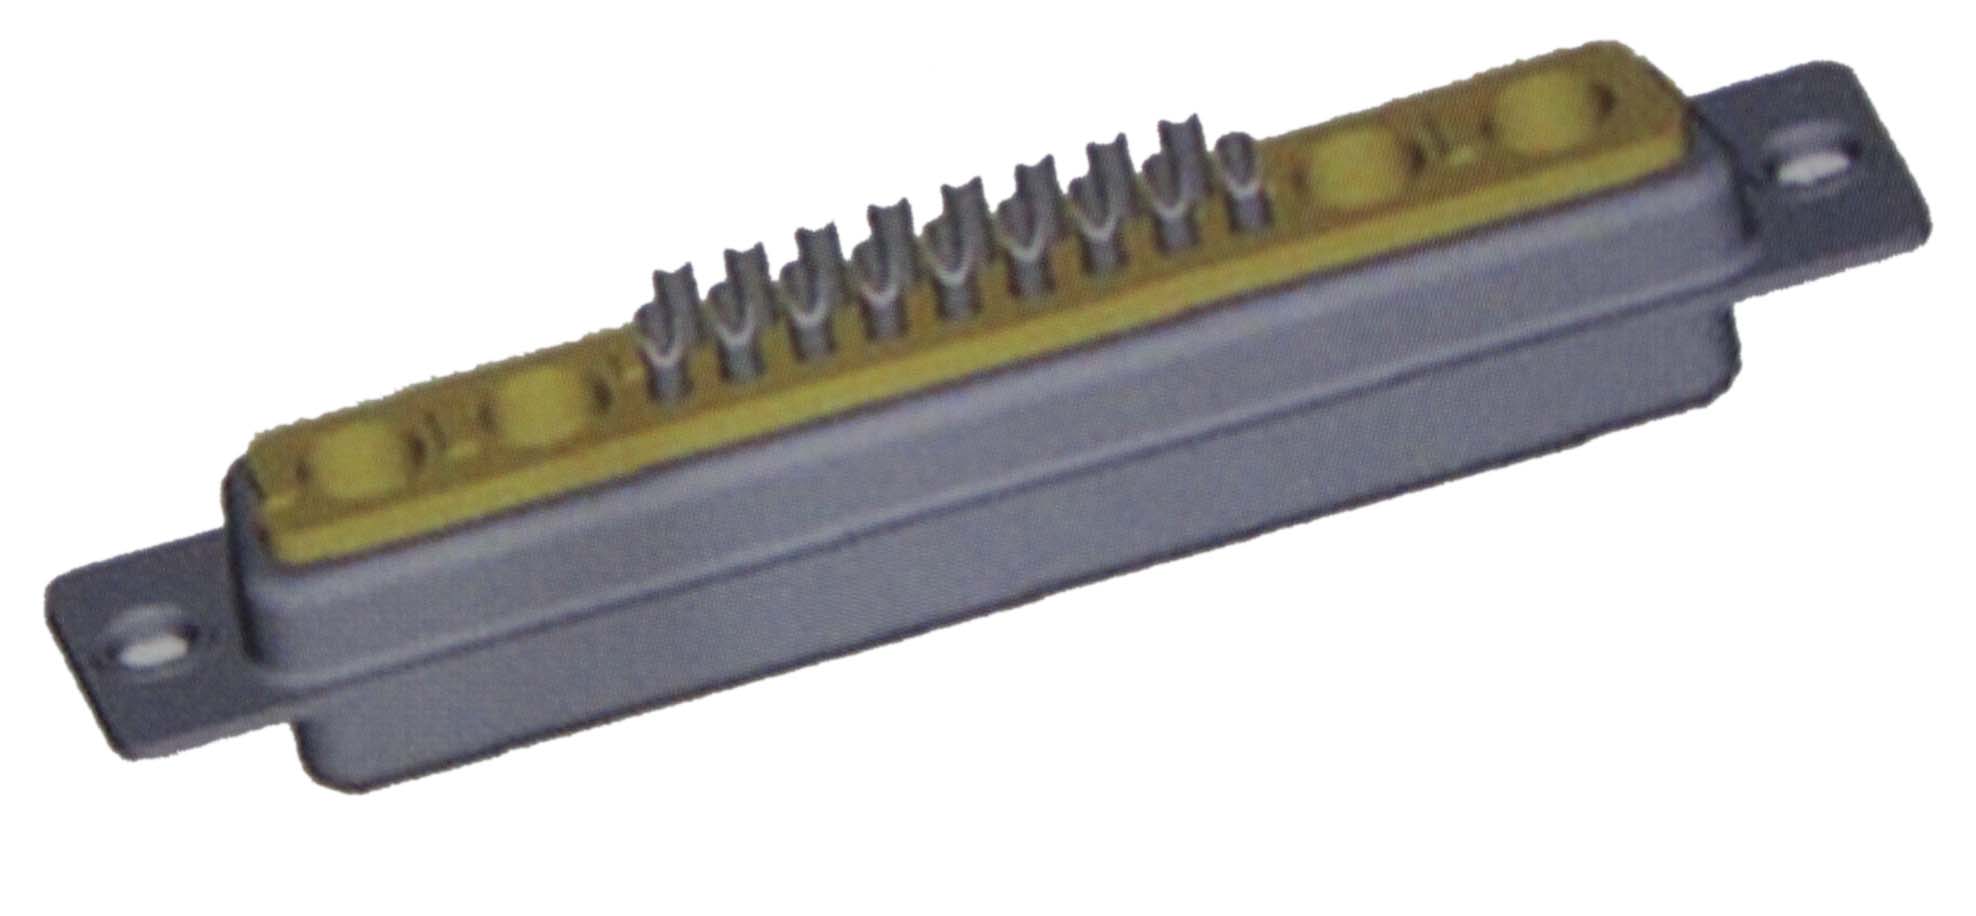 Coaxial D-SUB 21W4 FEMALE Solder Cup